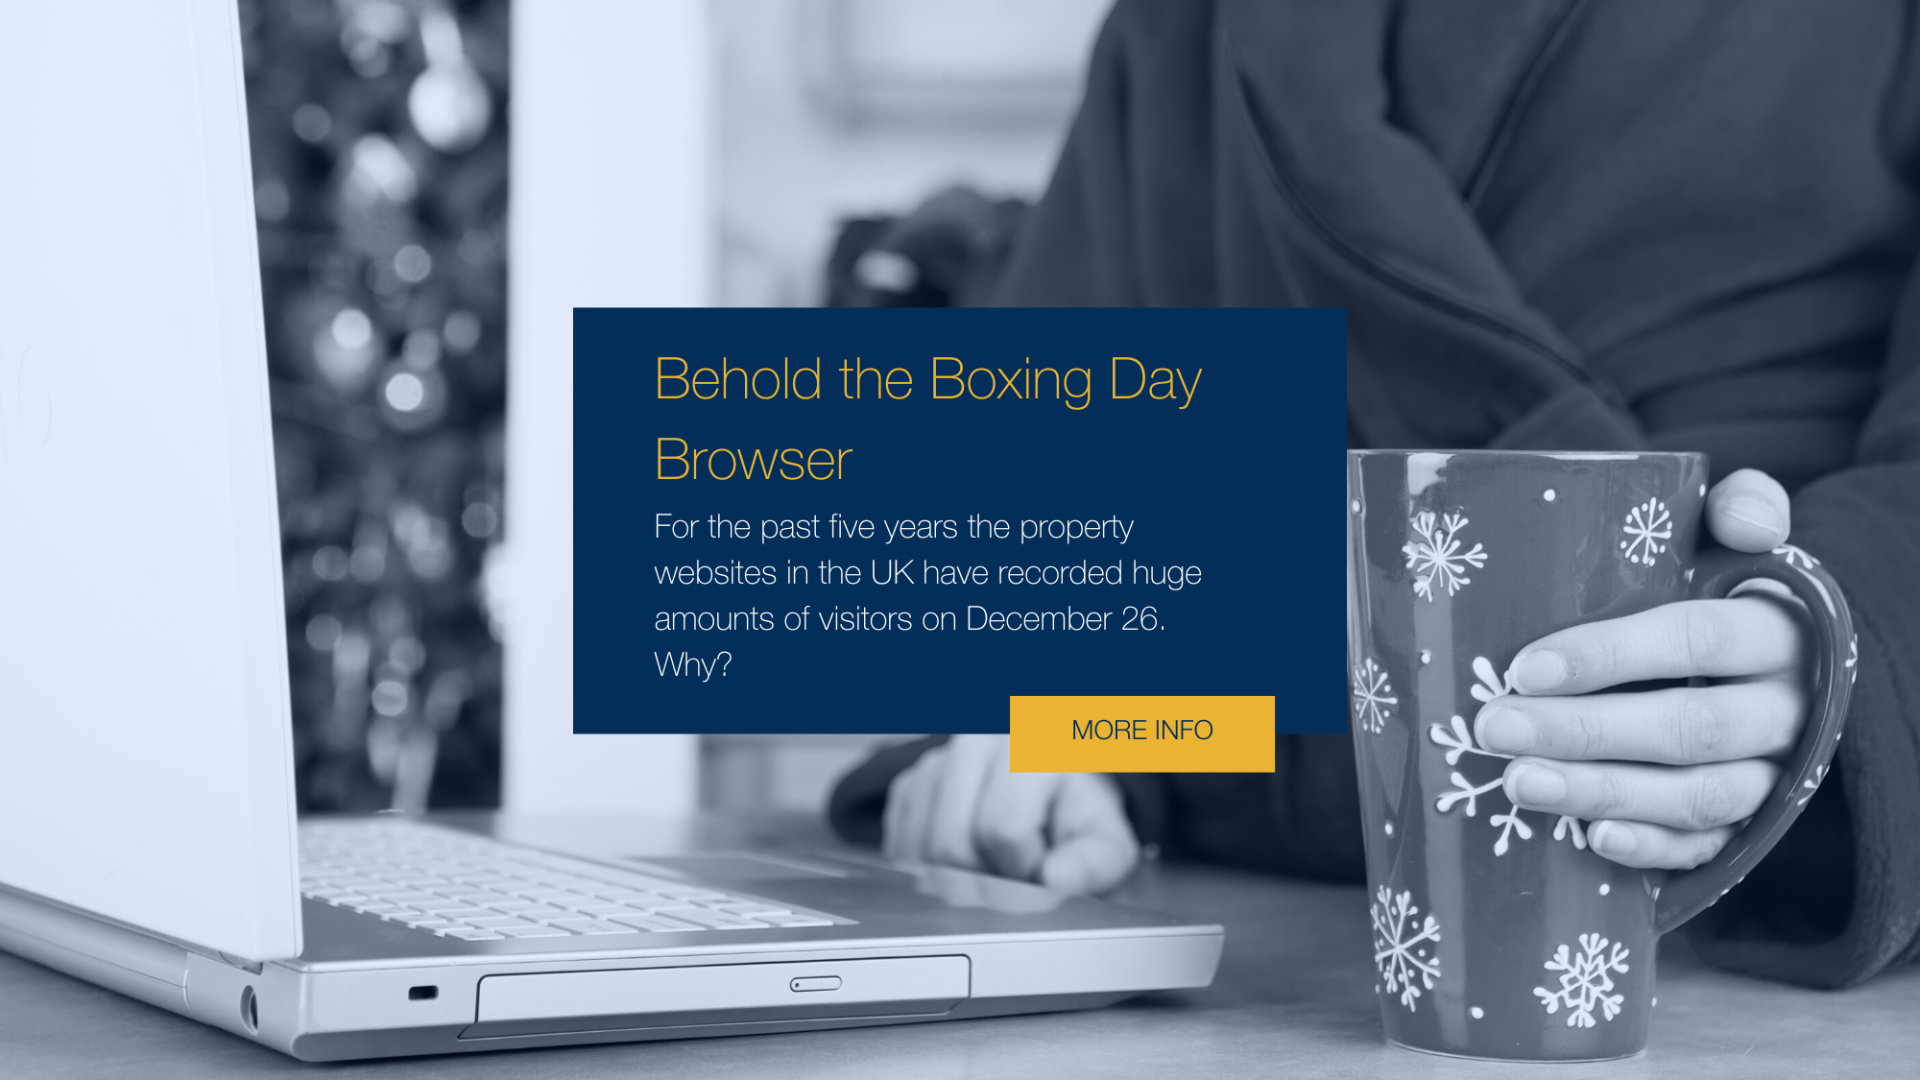 Behold the Boxing Day Browser